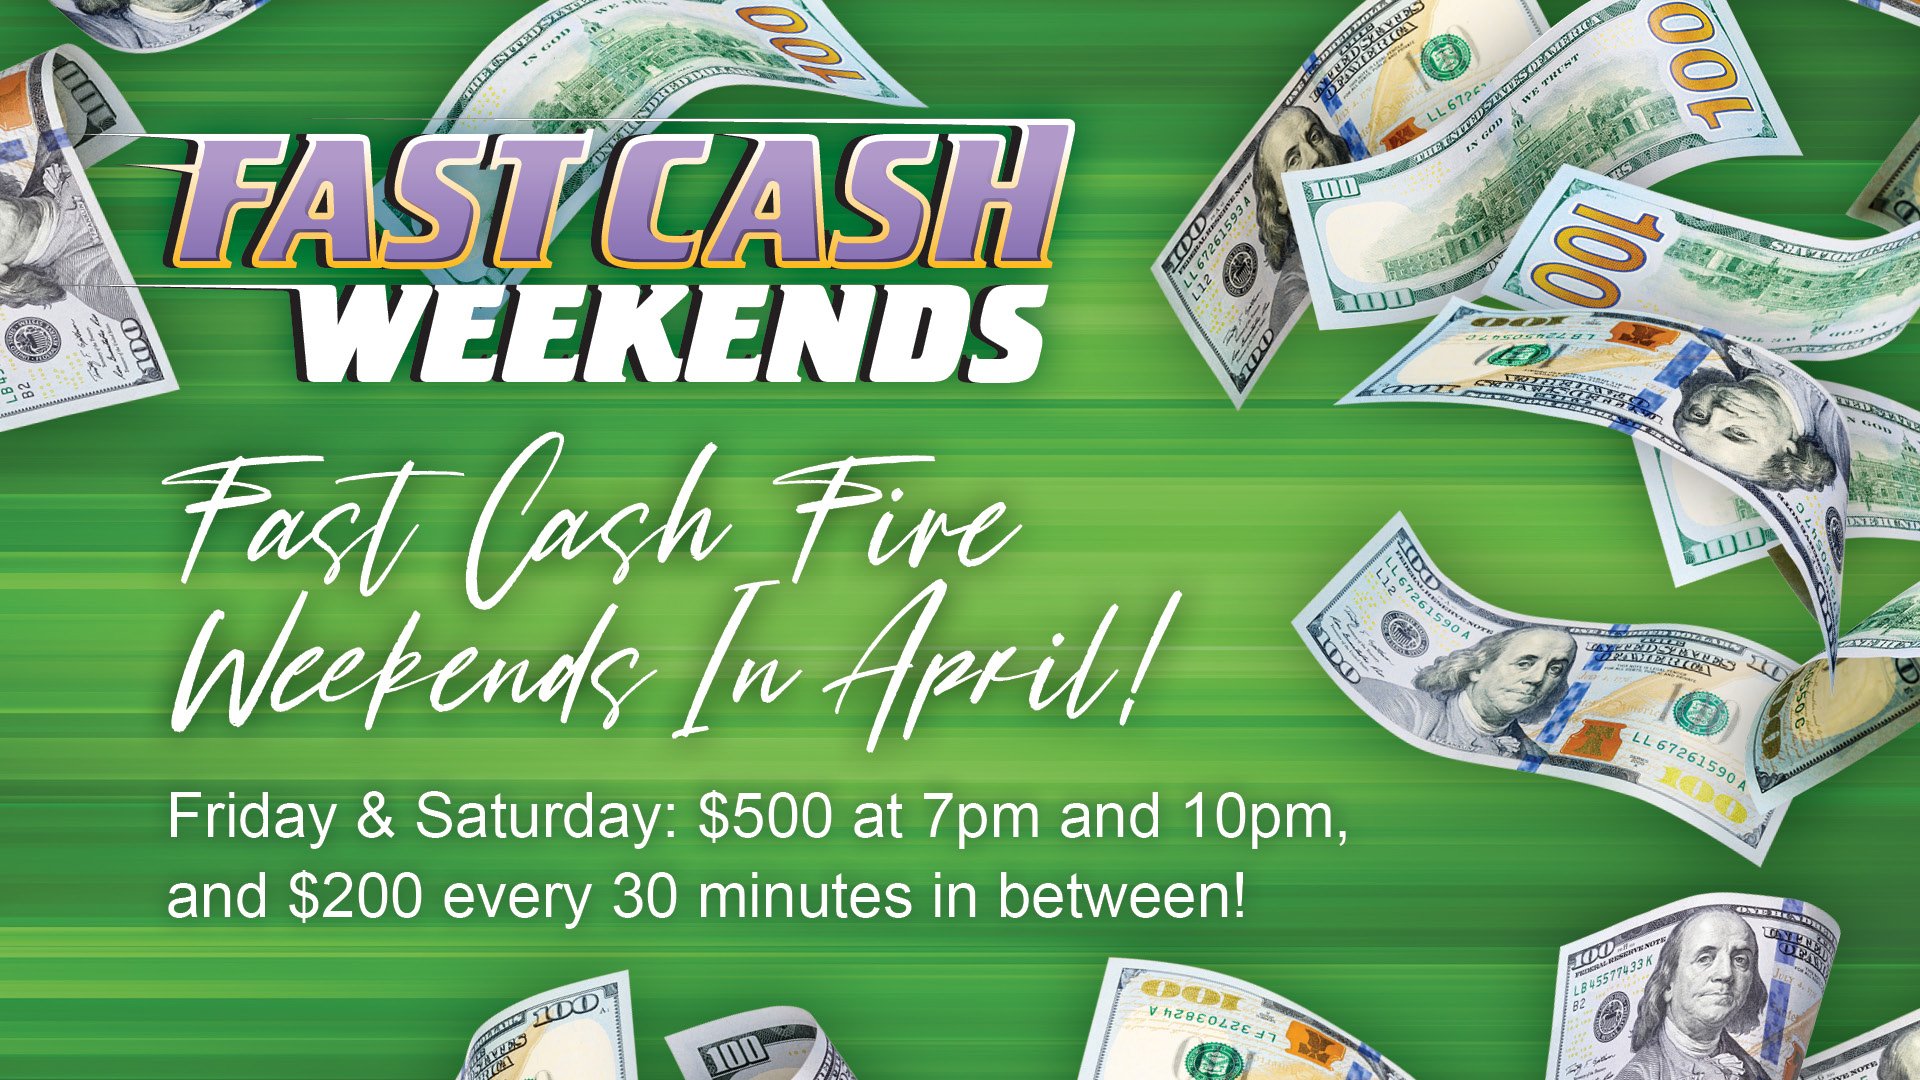 Fast Cash Weekends in April